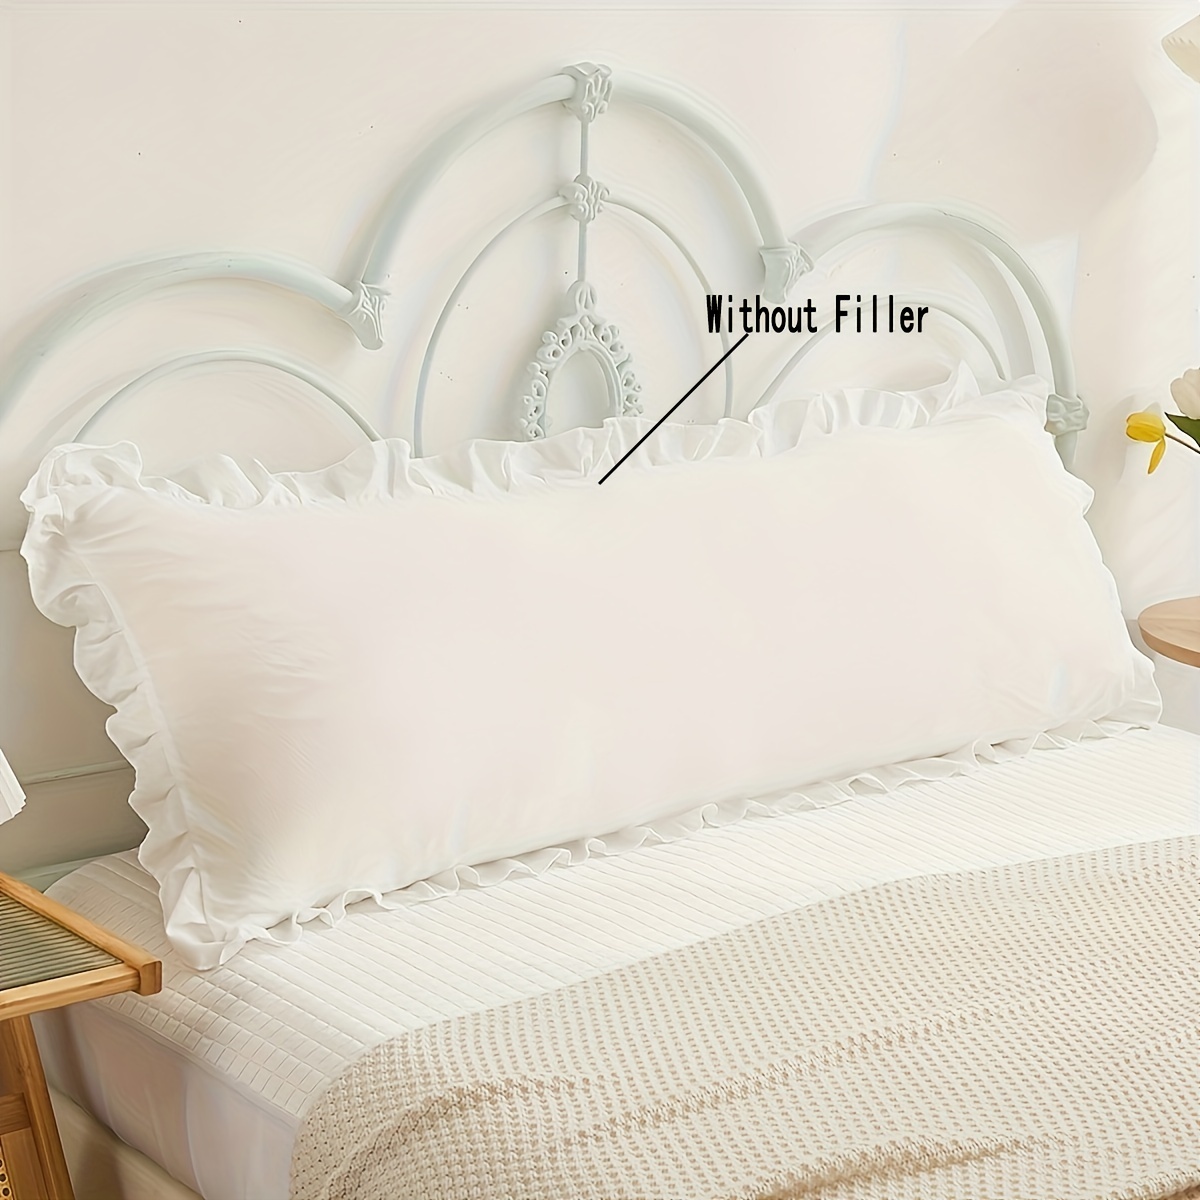 

1pc Solid Color Chemical Fiber Pillowcase With White Ruffle, Soft Cozy Long Pillow Cover With Envelope Closure, Suitable For Sofa Room Decorative Pillowcase, Bed Casual Pillowcase, 51 * 137cm